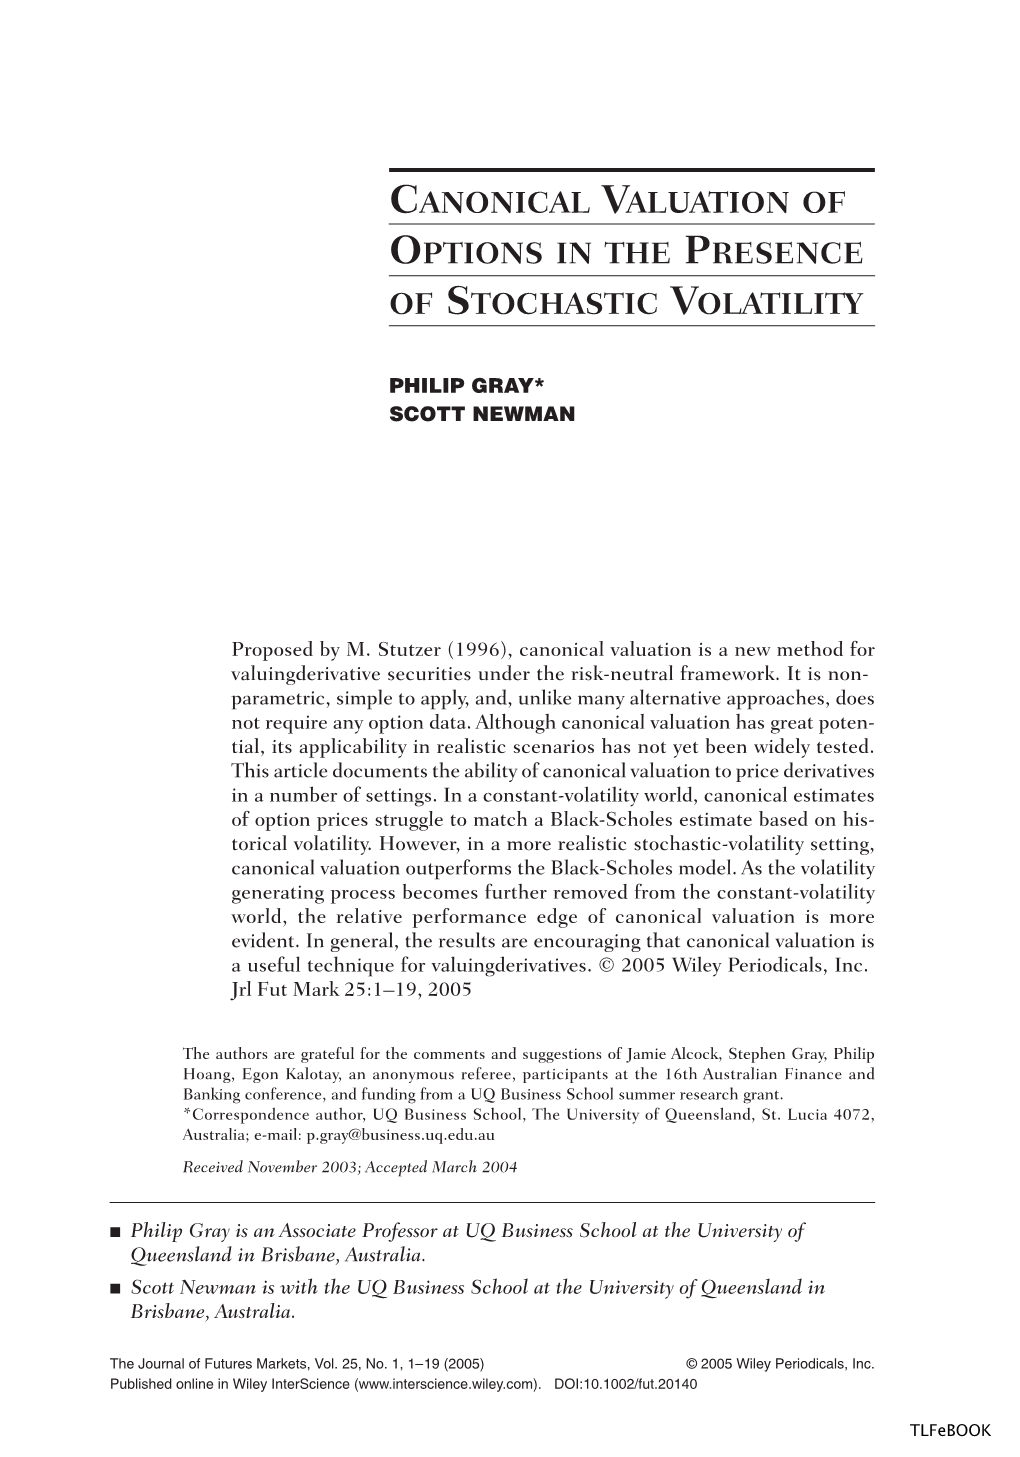 Canonical Valuation of Options in the Presence of Stochastic Volatility